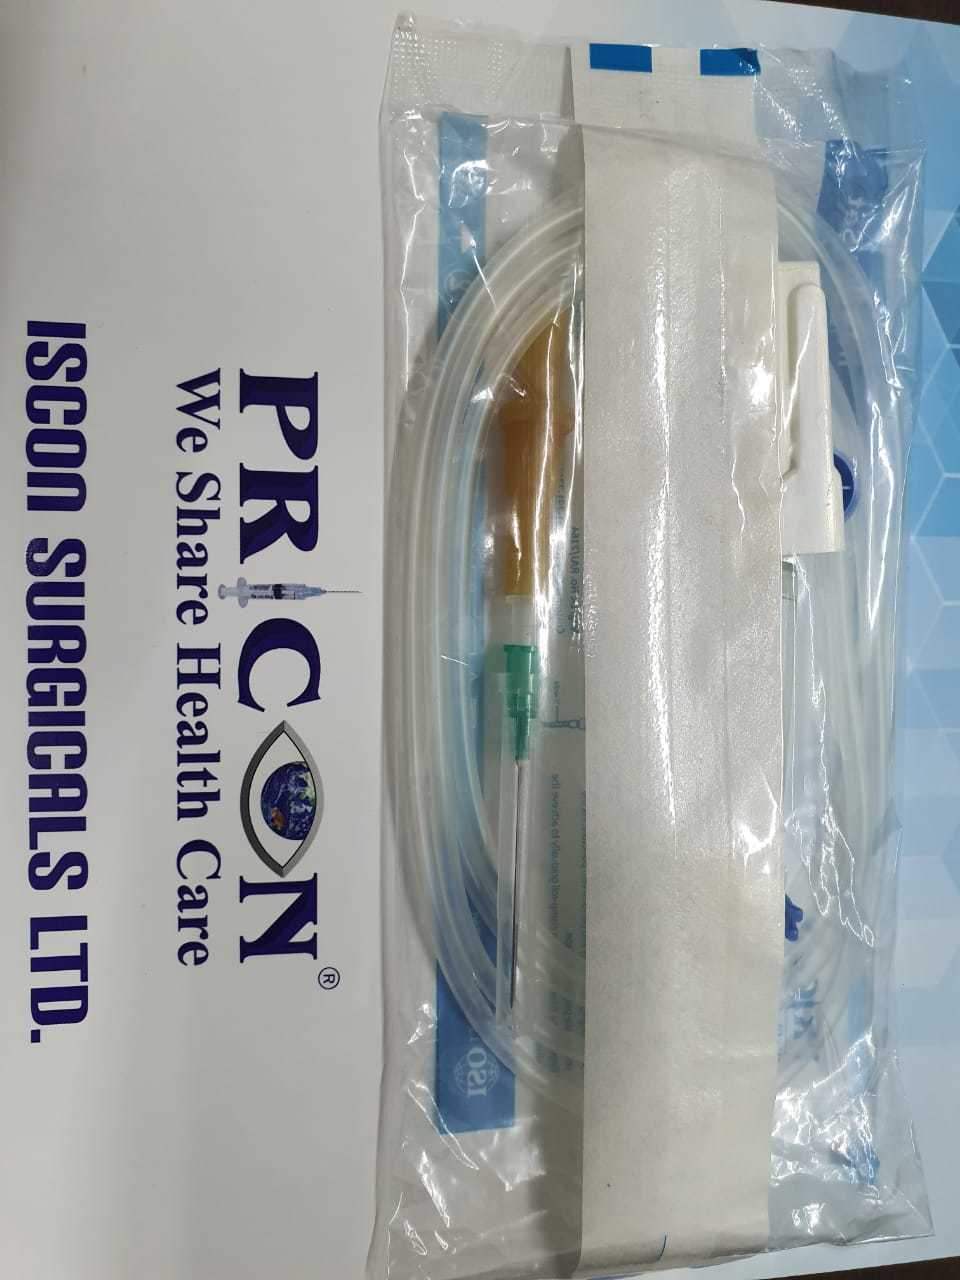 Disposable Infusion Sets